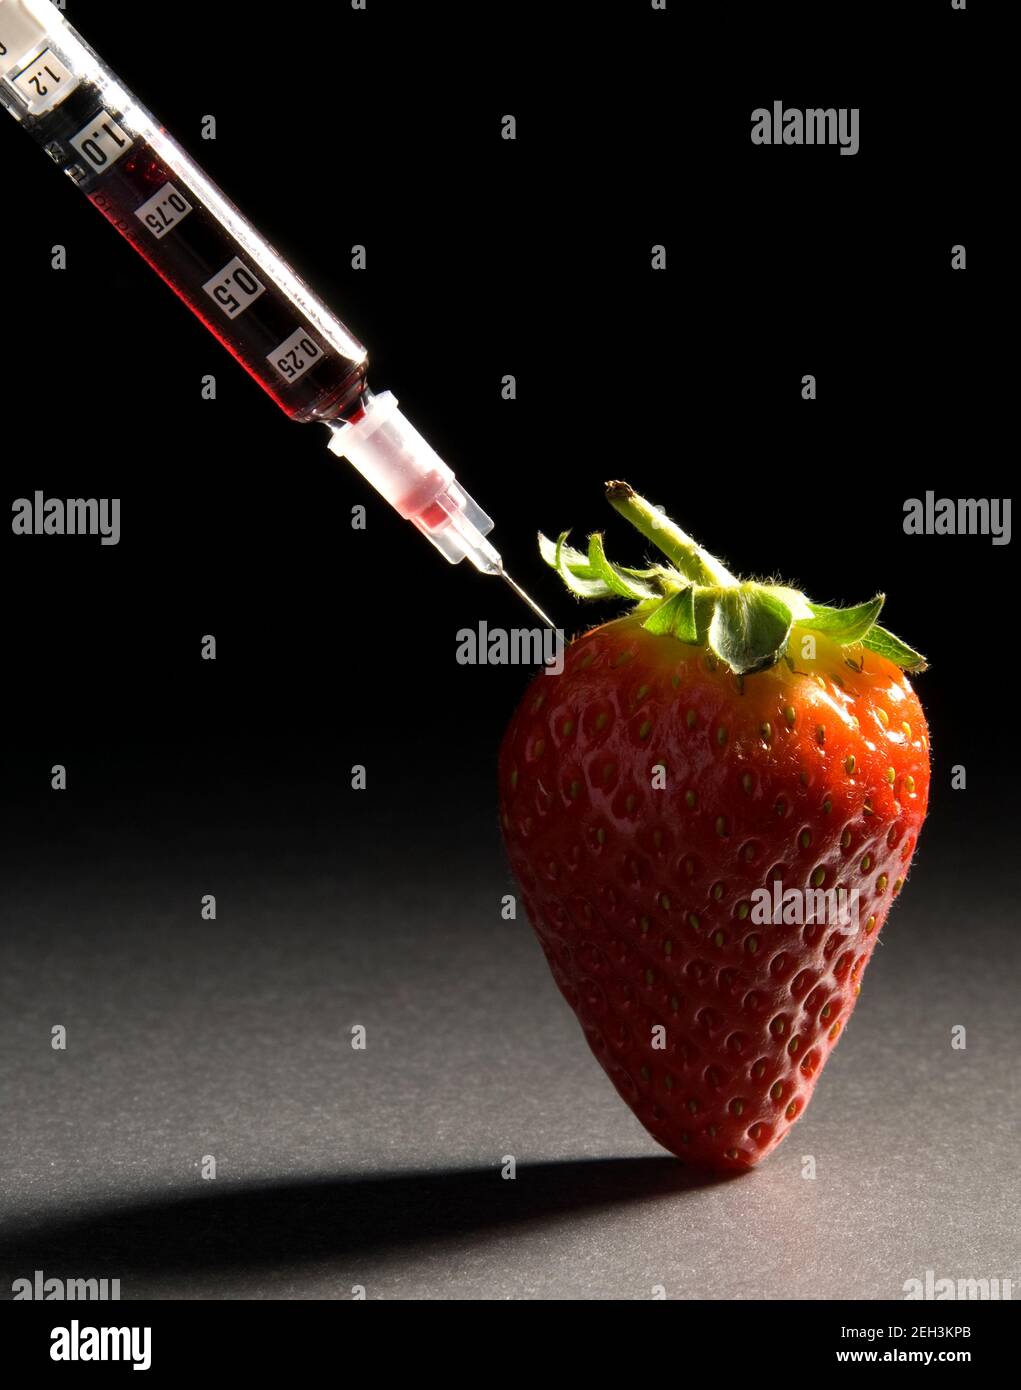 Strawberry injected with red dye. Stock Photo